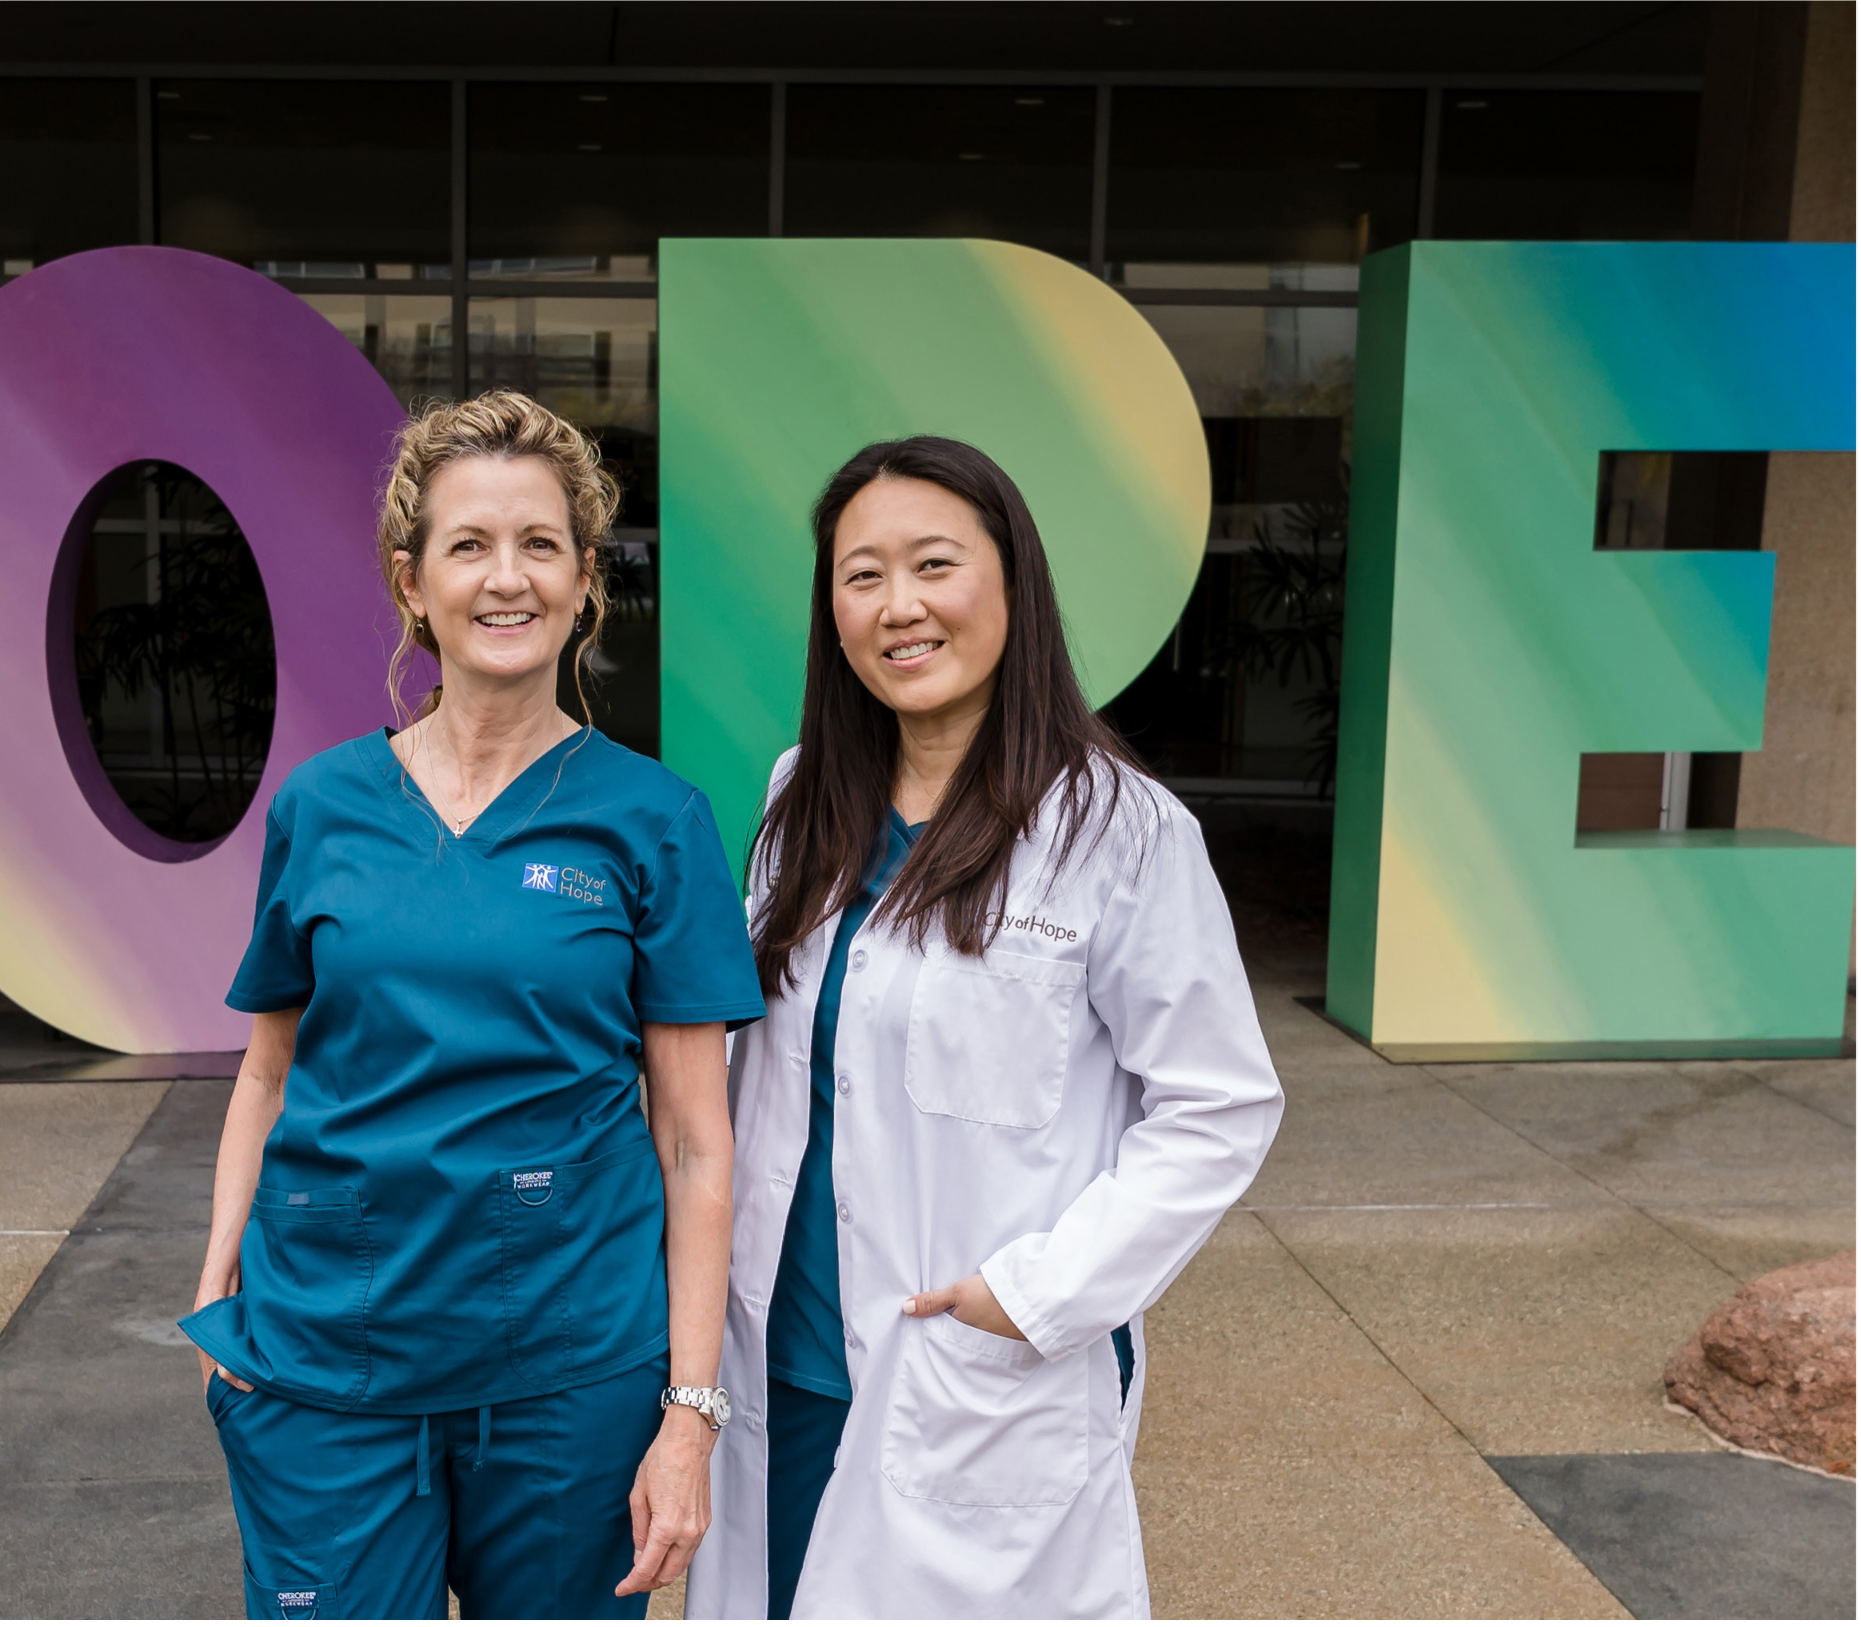 Two oncology nurses: From left: Mary Colasuonno, B.S.N, RN, BMTCN and Lesley Gan, M.S.N., M.S.H.A, RN, EBP-C   Photos by Alyssa Stefek